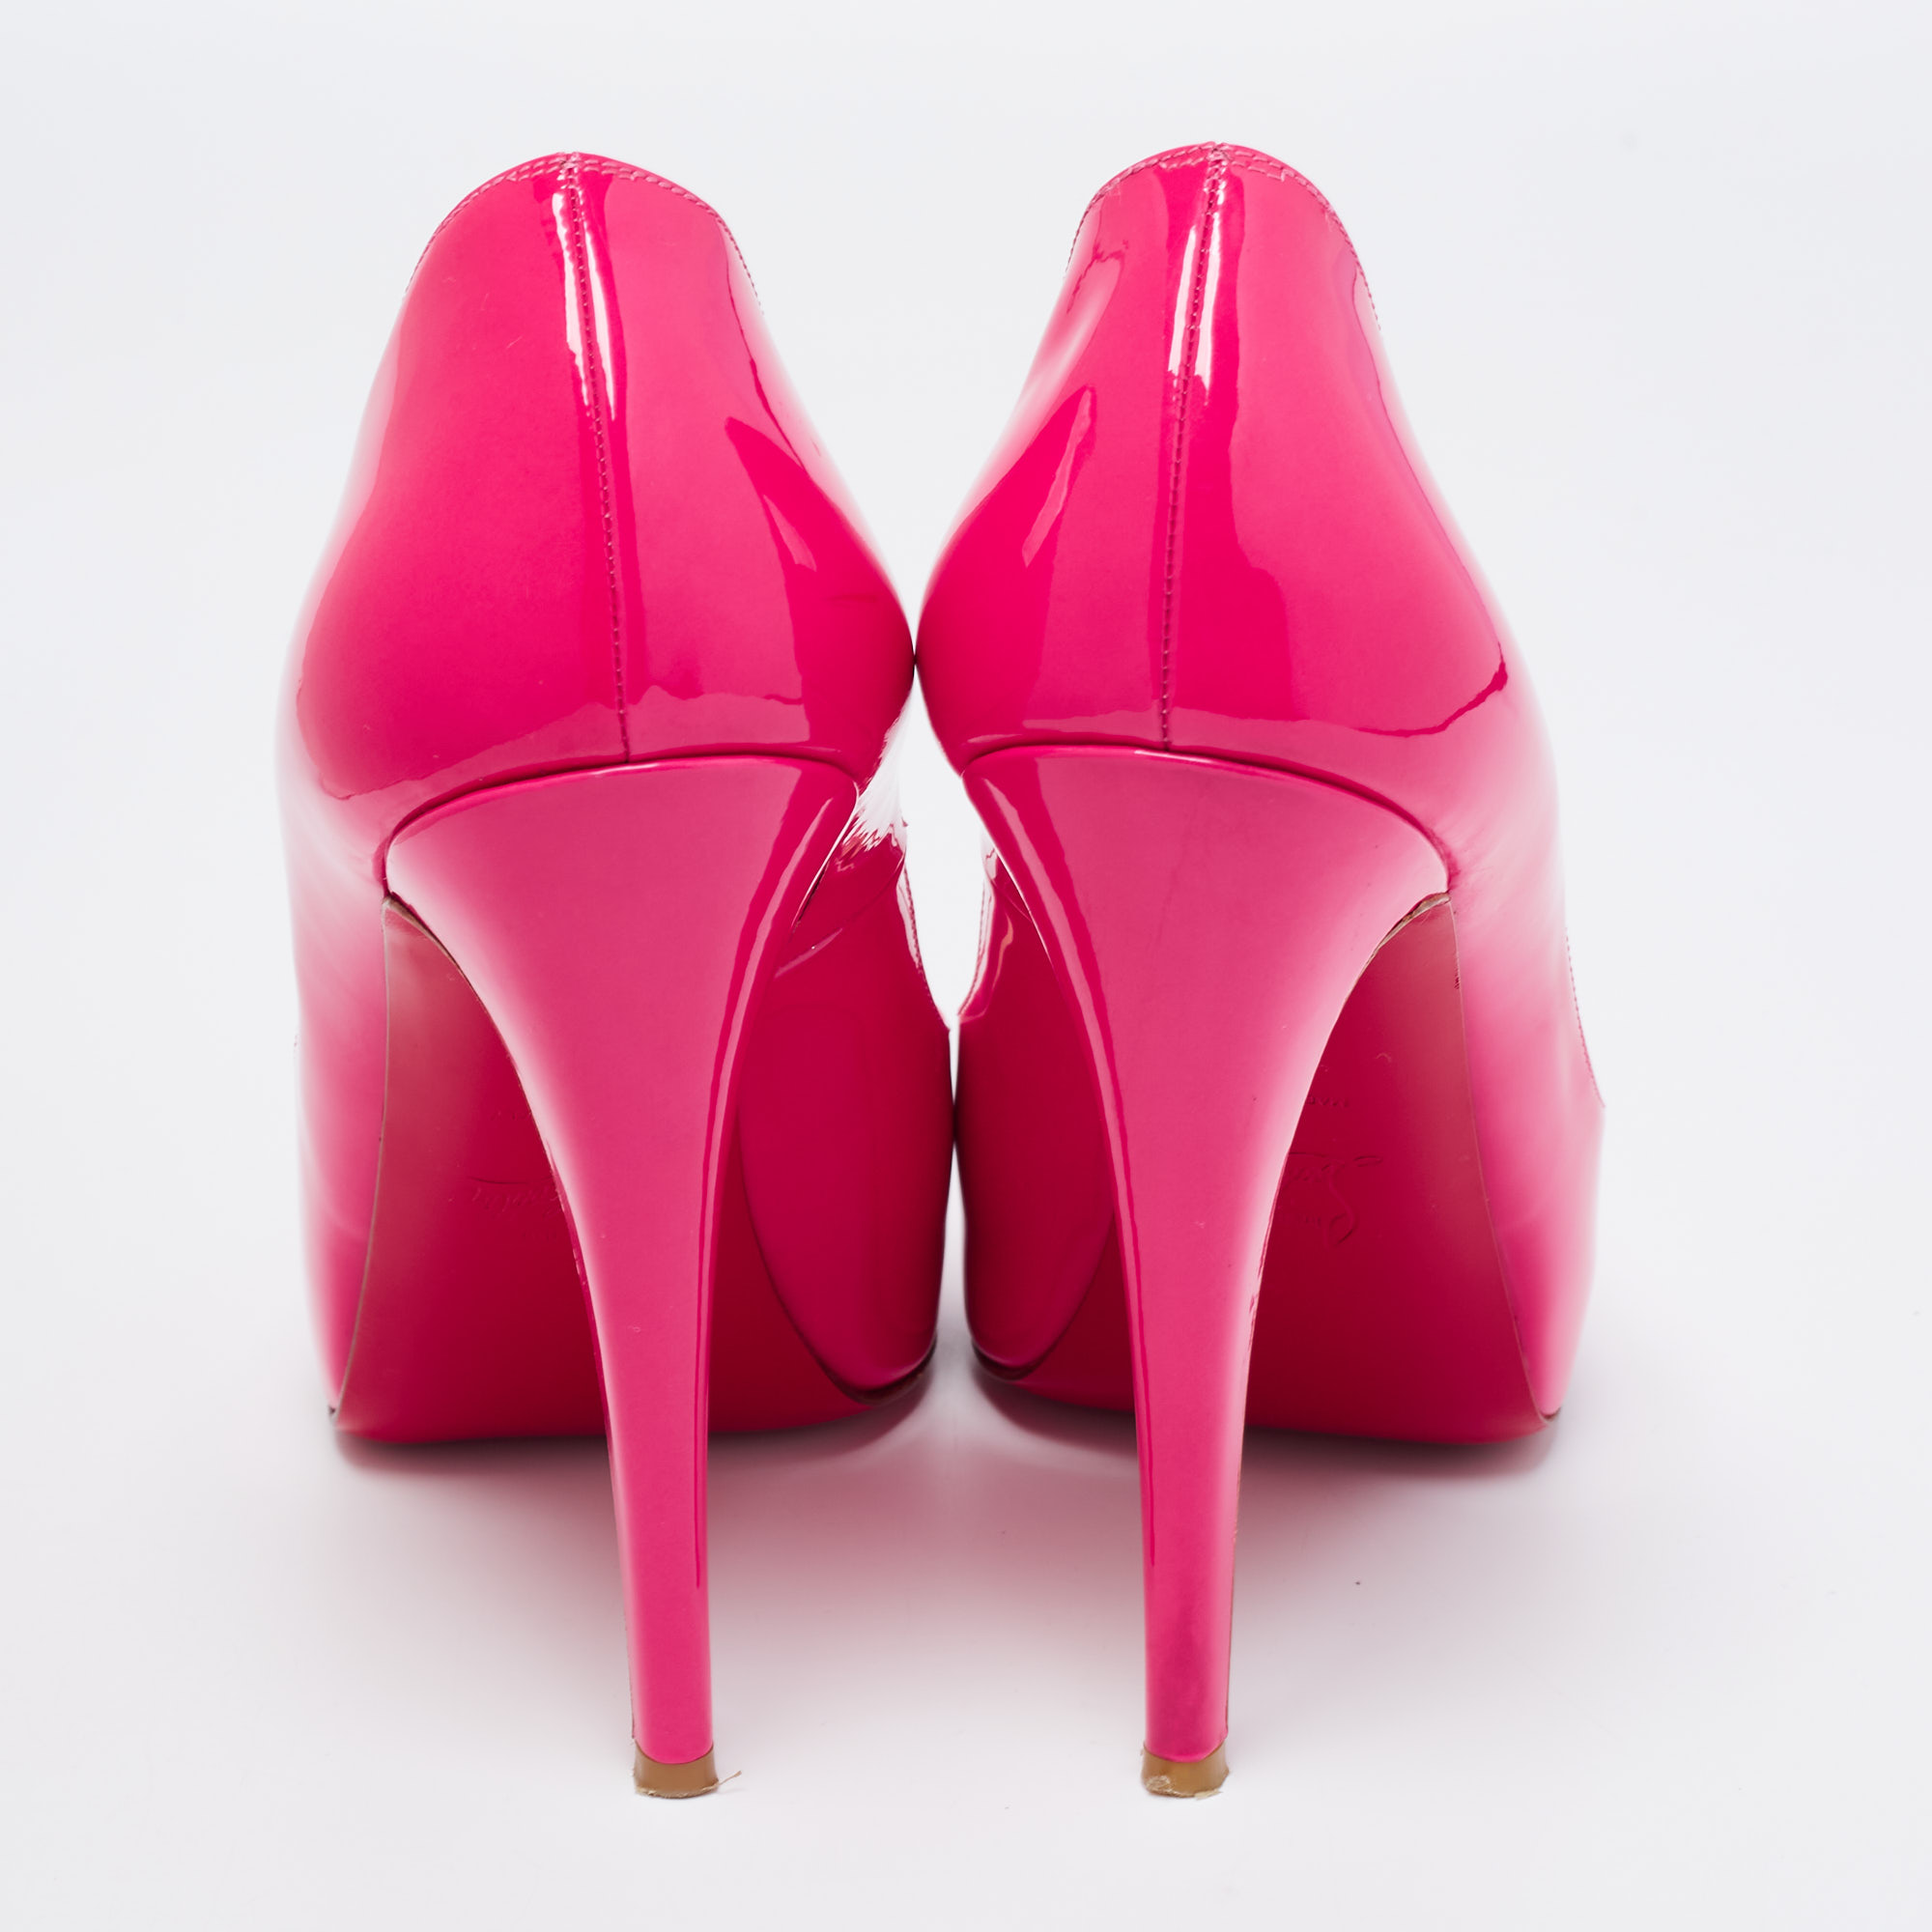 Christian Louboutin Pink Patent Leather New Very Prive Peep Toe Platform Pumps Size 41